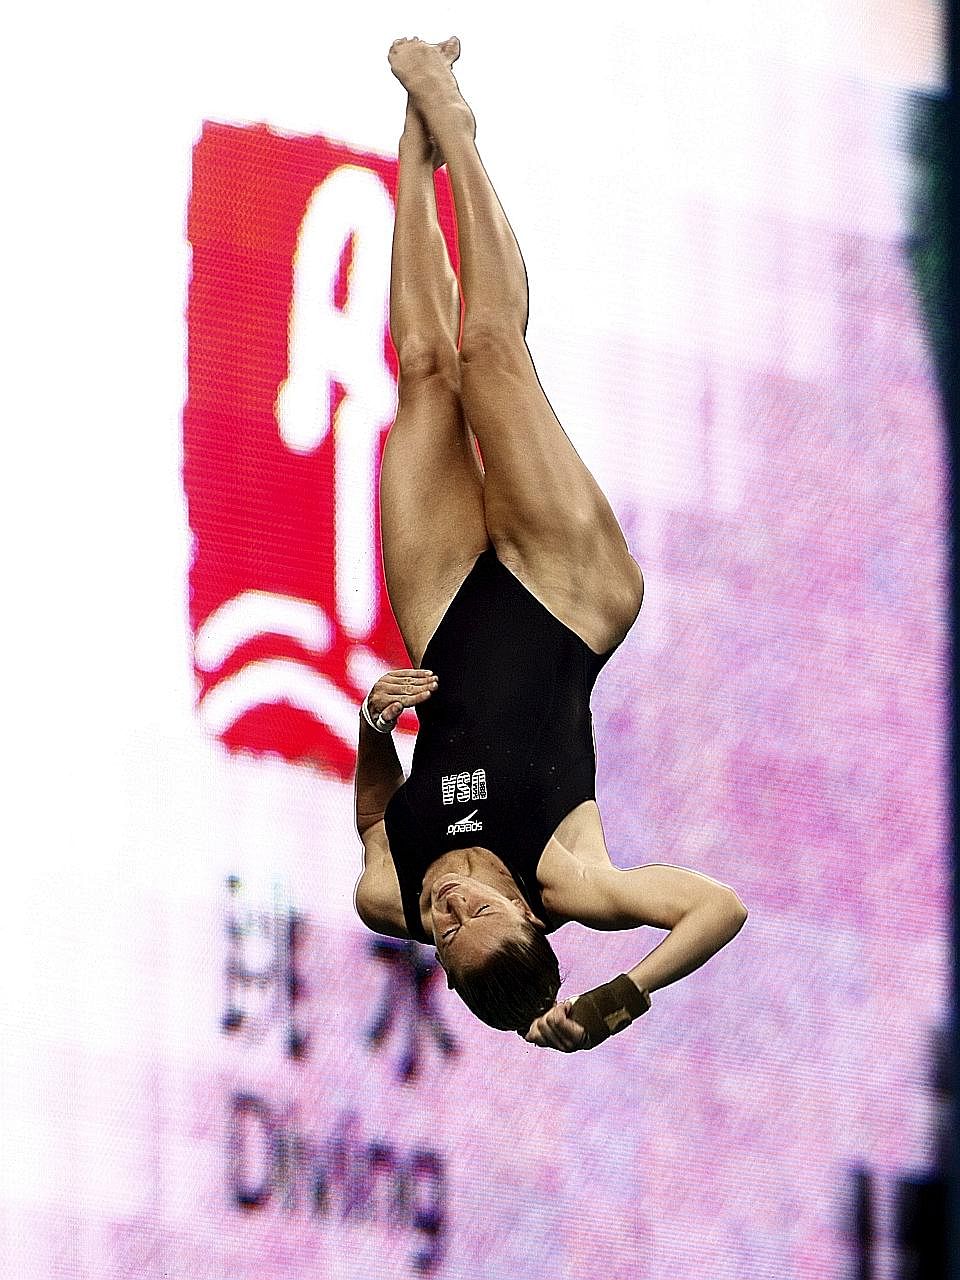 Laura Wilkinson competed in two more Olympics, including the 2008 event (above) since her historic feat at the 2000 Sydney Games where she won the 10m platform gold to end China's diving domination since 1984.